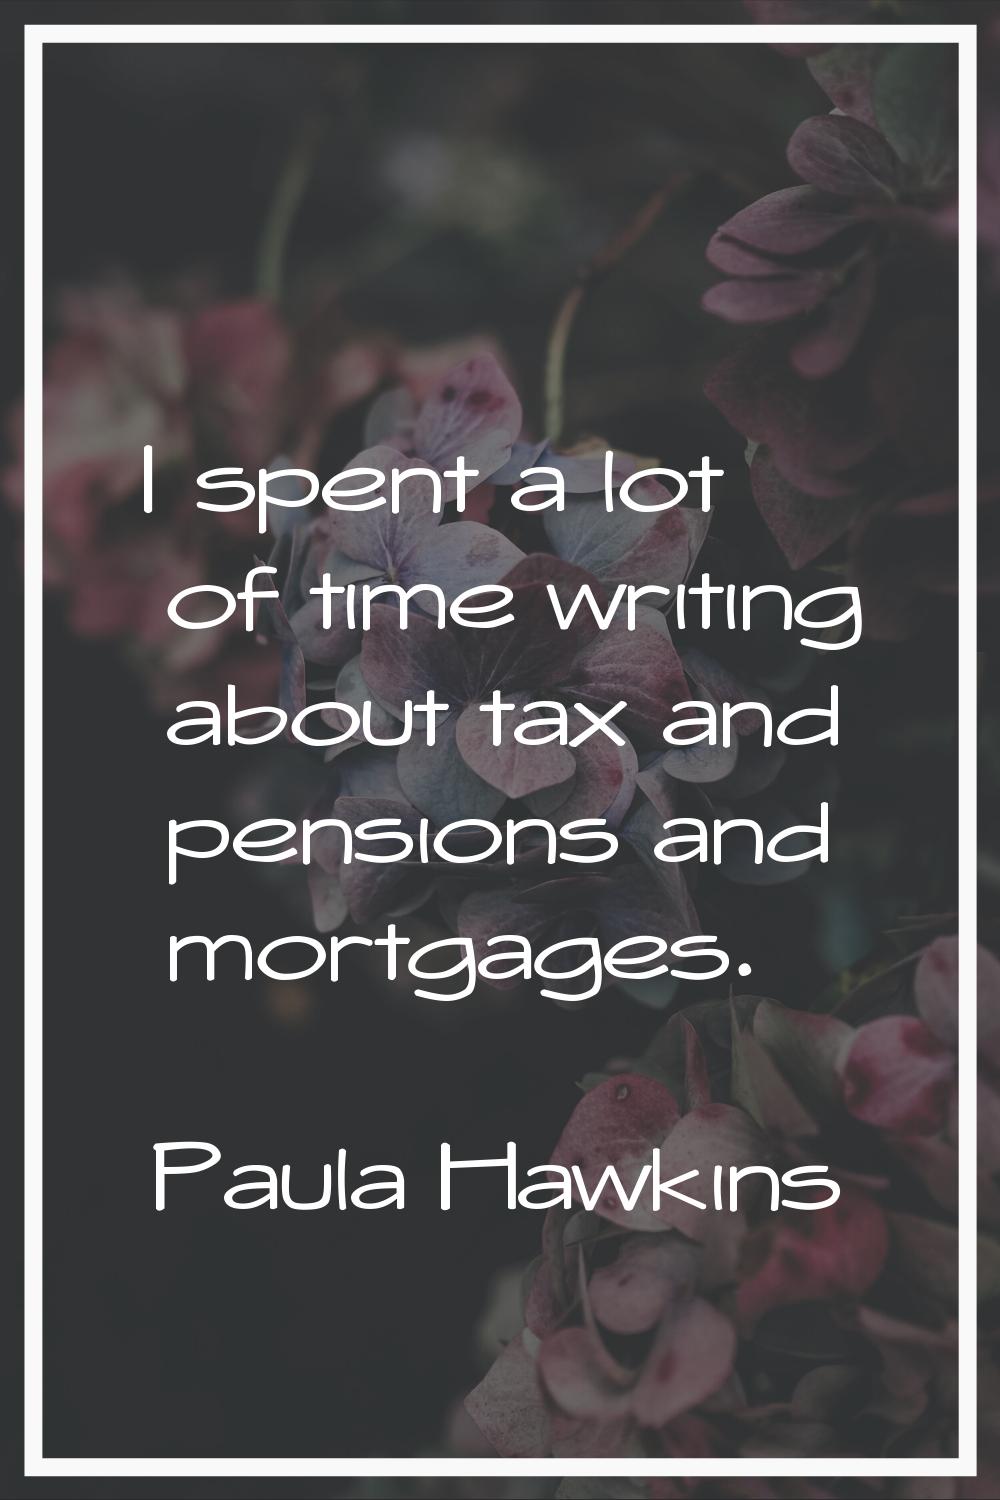 I spent a lot of time writing about tax and pensions and mortgages.